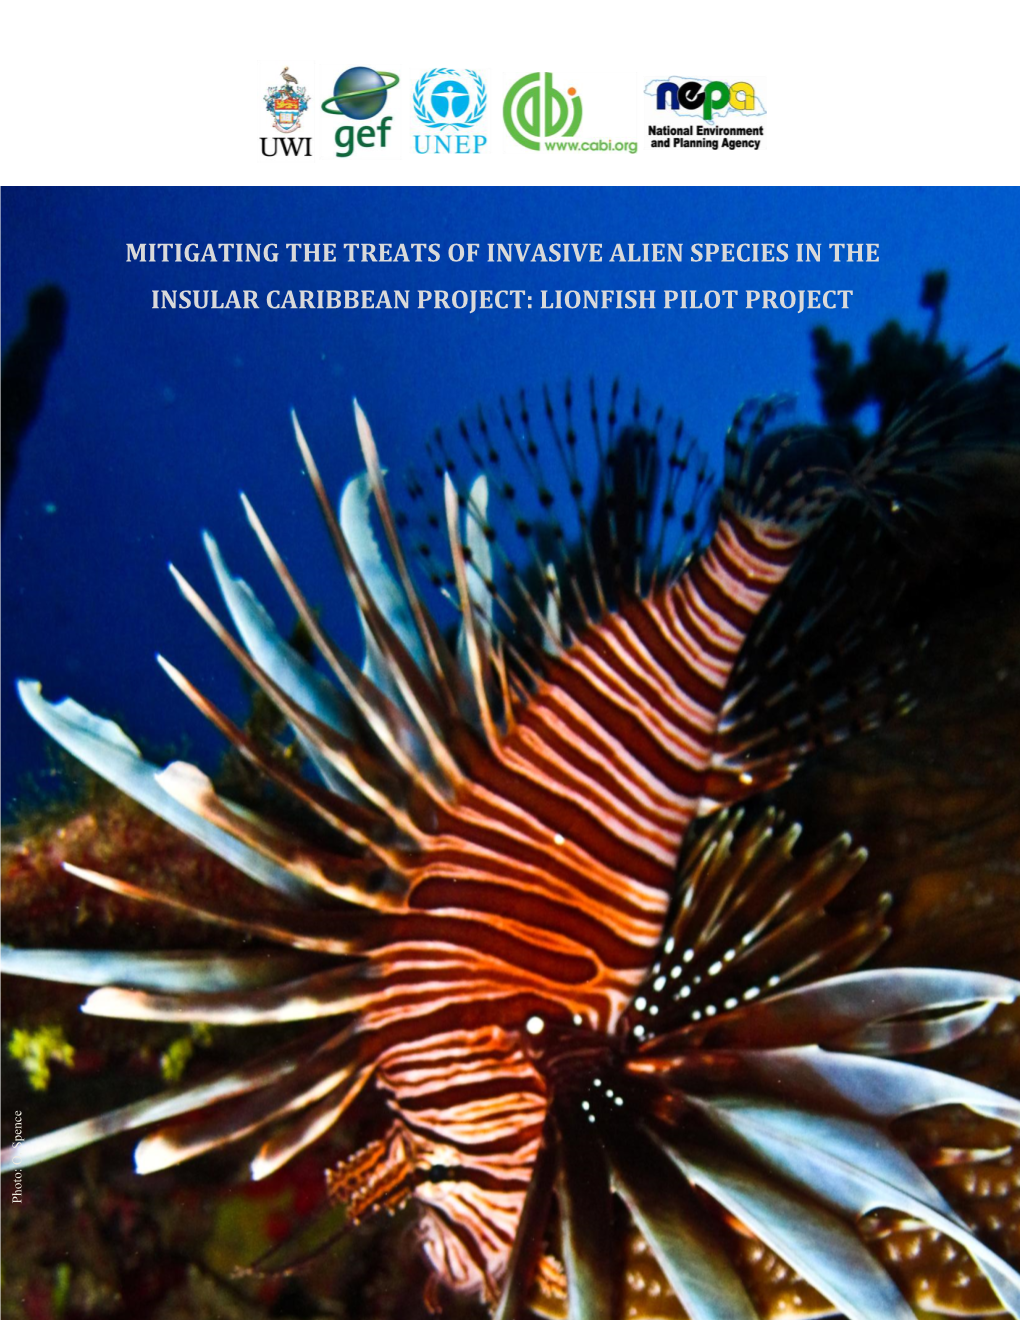 Lionfish Project Technical Report